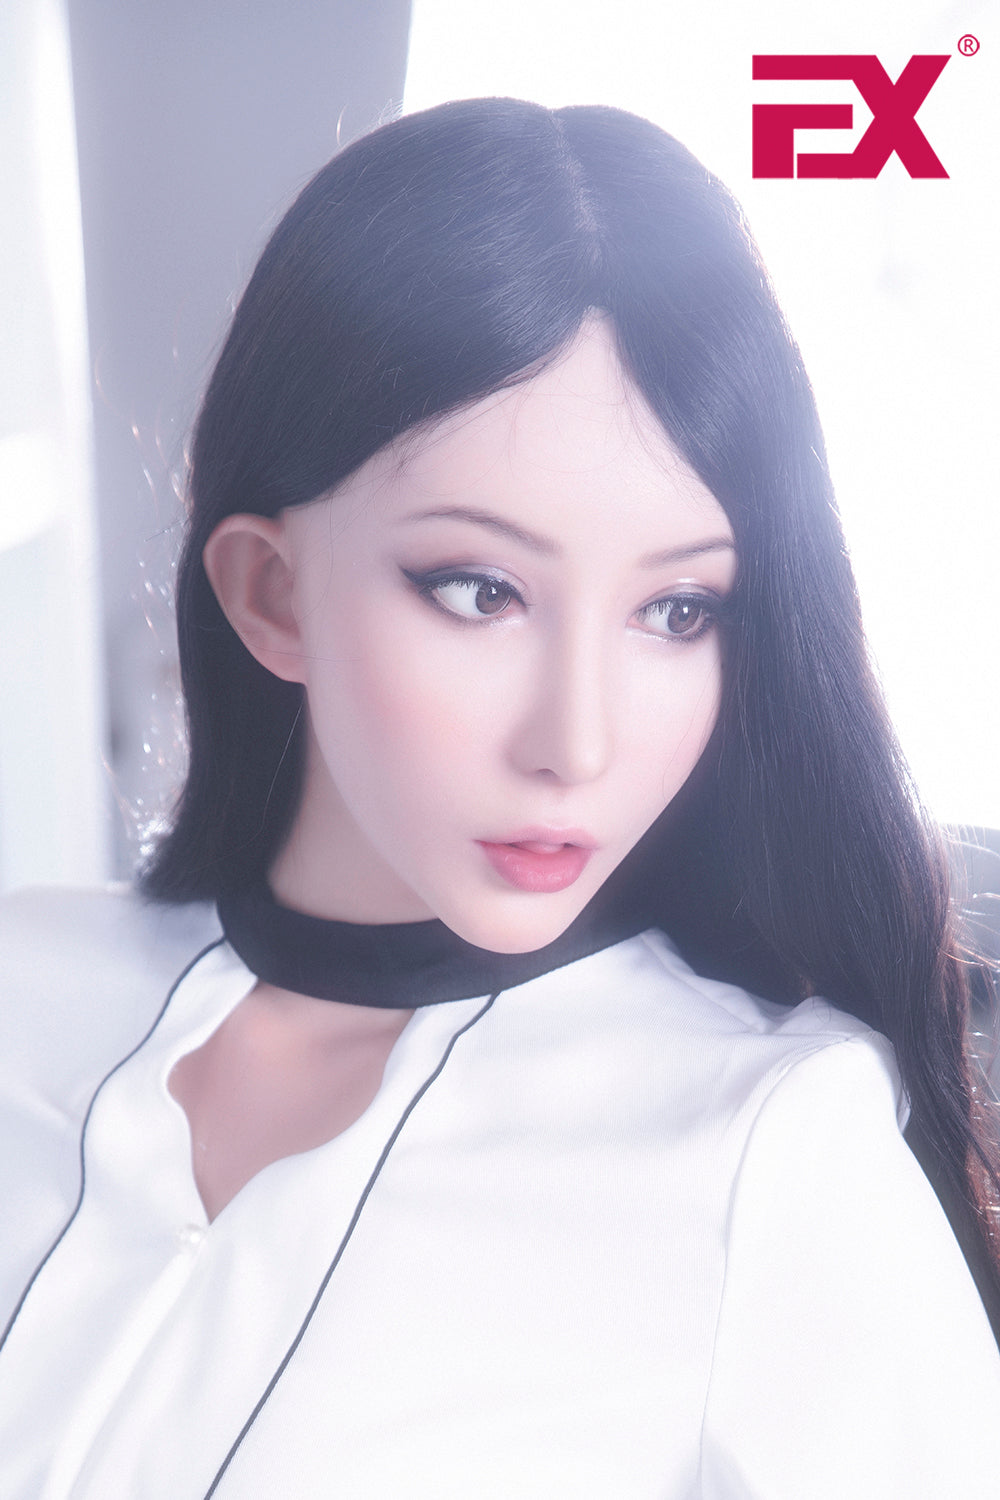 EX Doll Clone Series 168 cm Silicone - En Hee | Buy Sex Dolls at DOLLS ACTUALLY